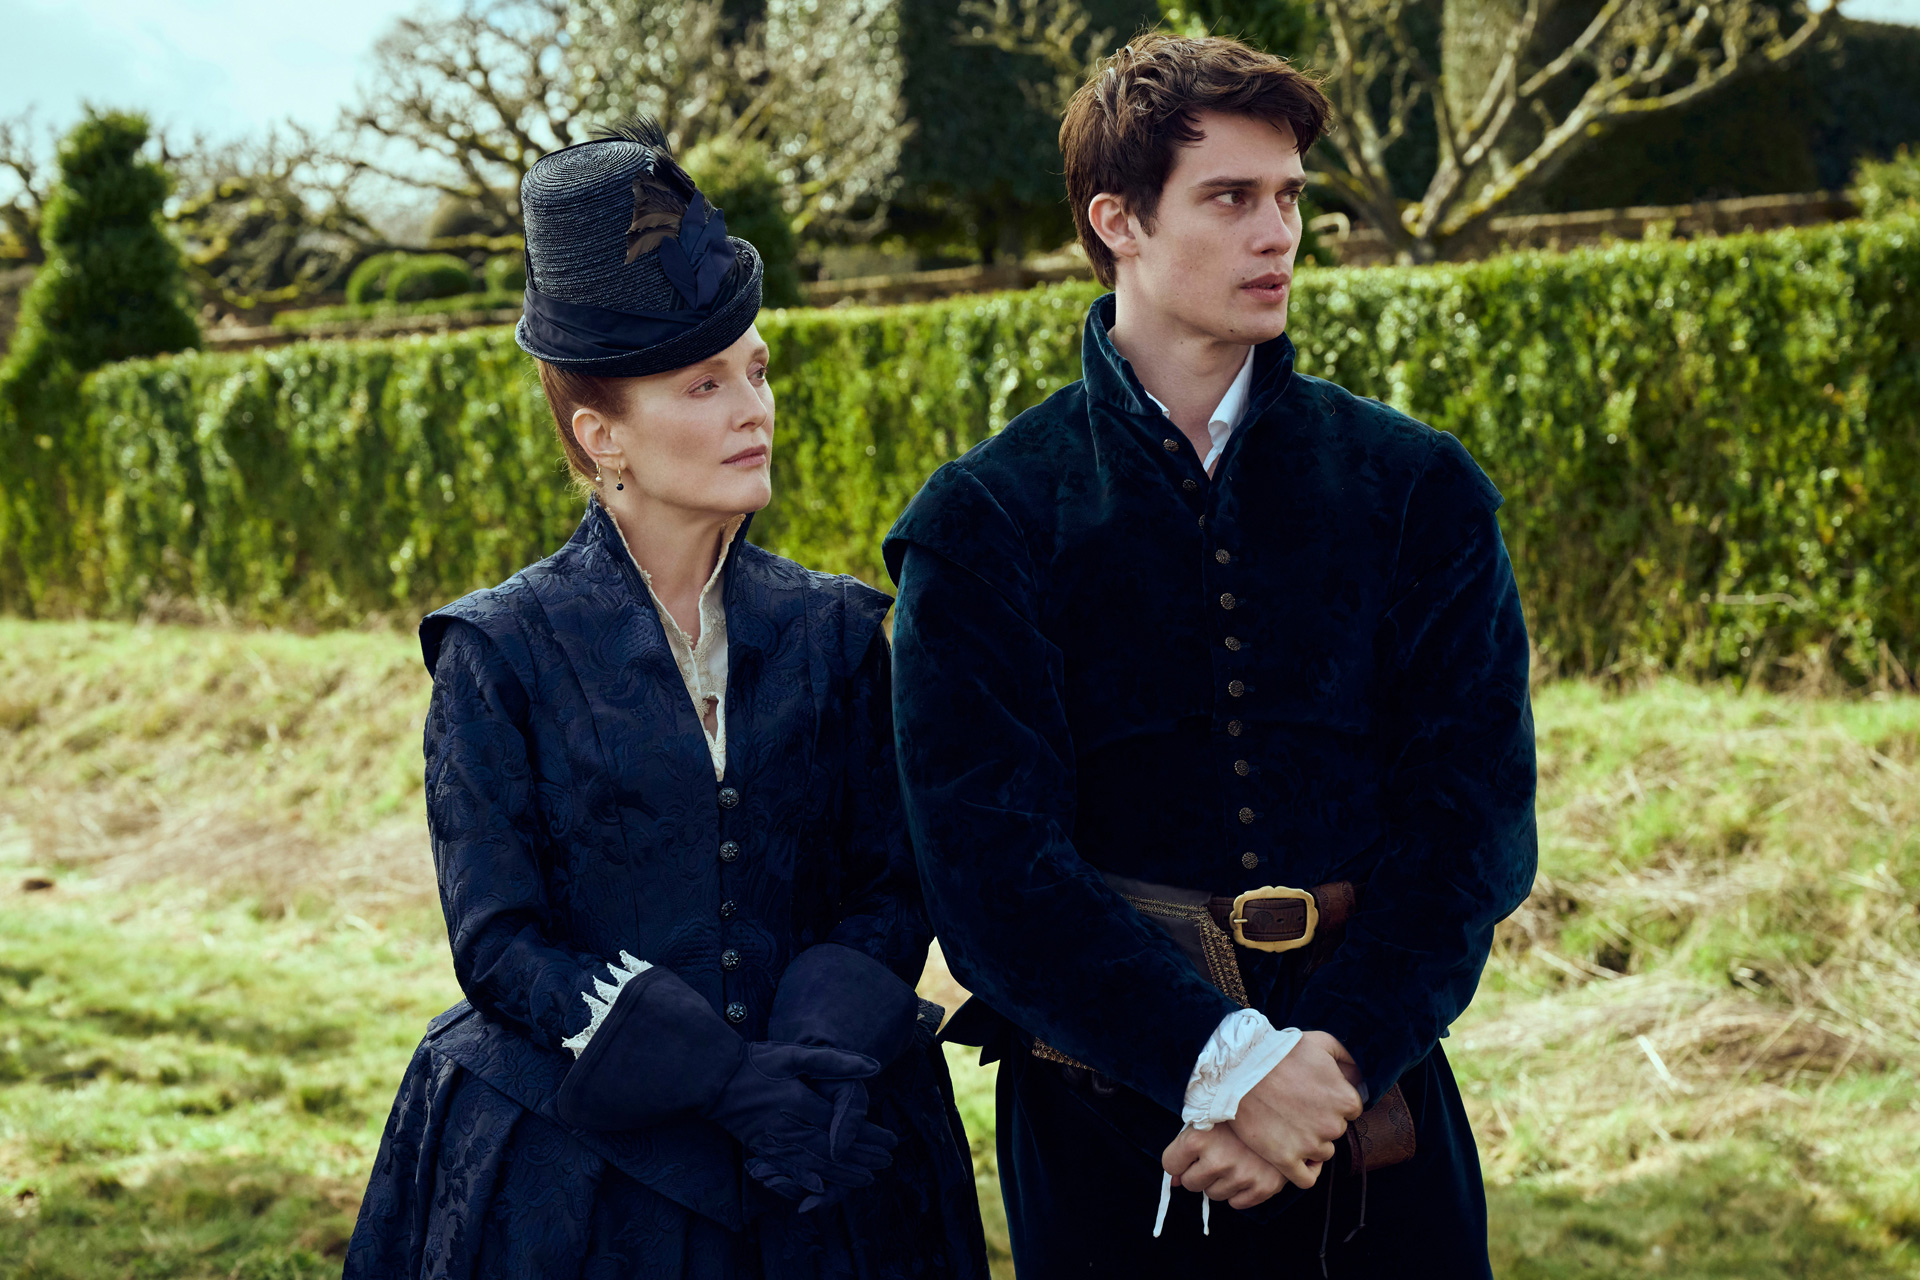 Julianne Moore and Nicholas Galitzine as Mary and George